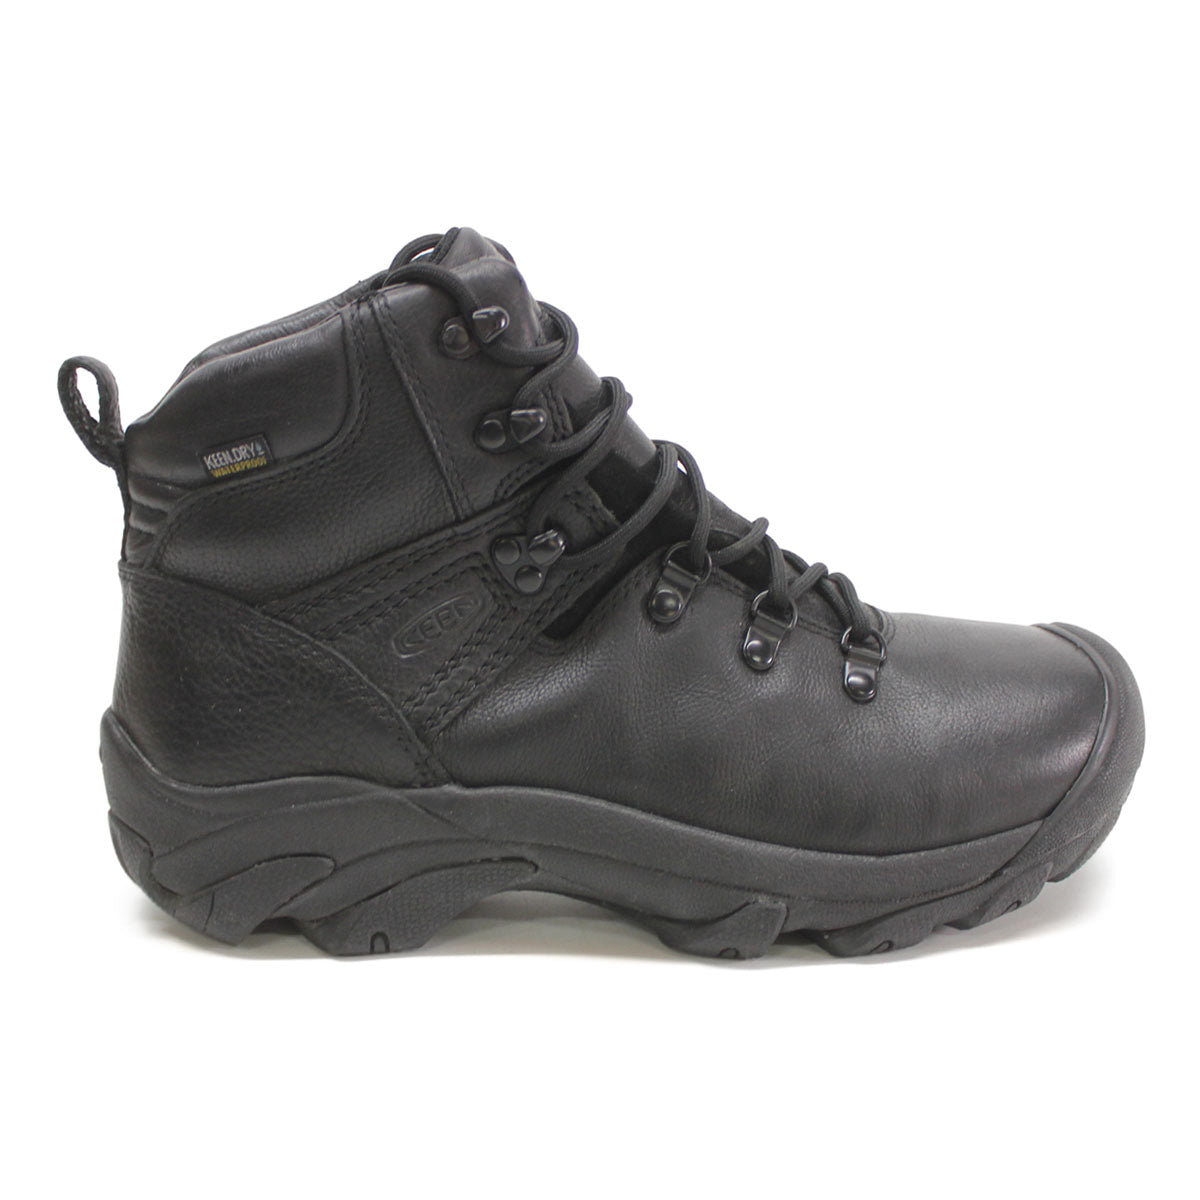 Keen Womens Pyrenees Leather Boots - UK 8